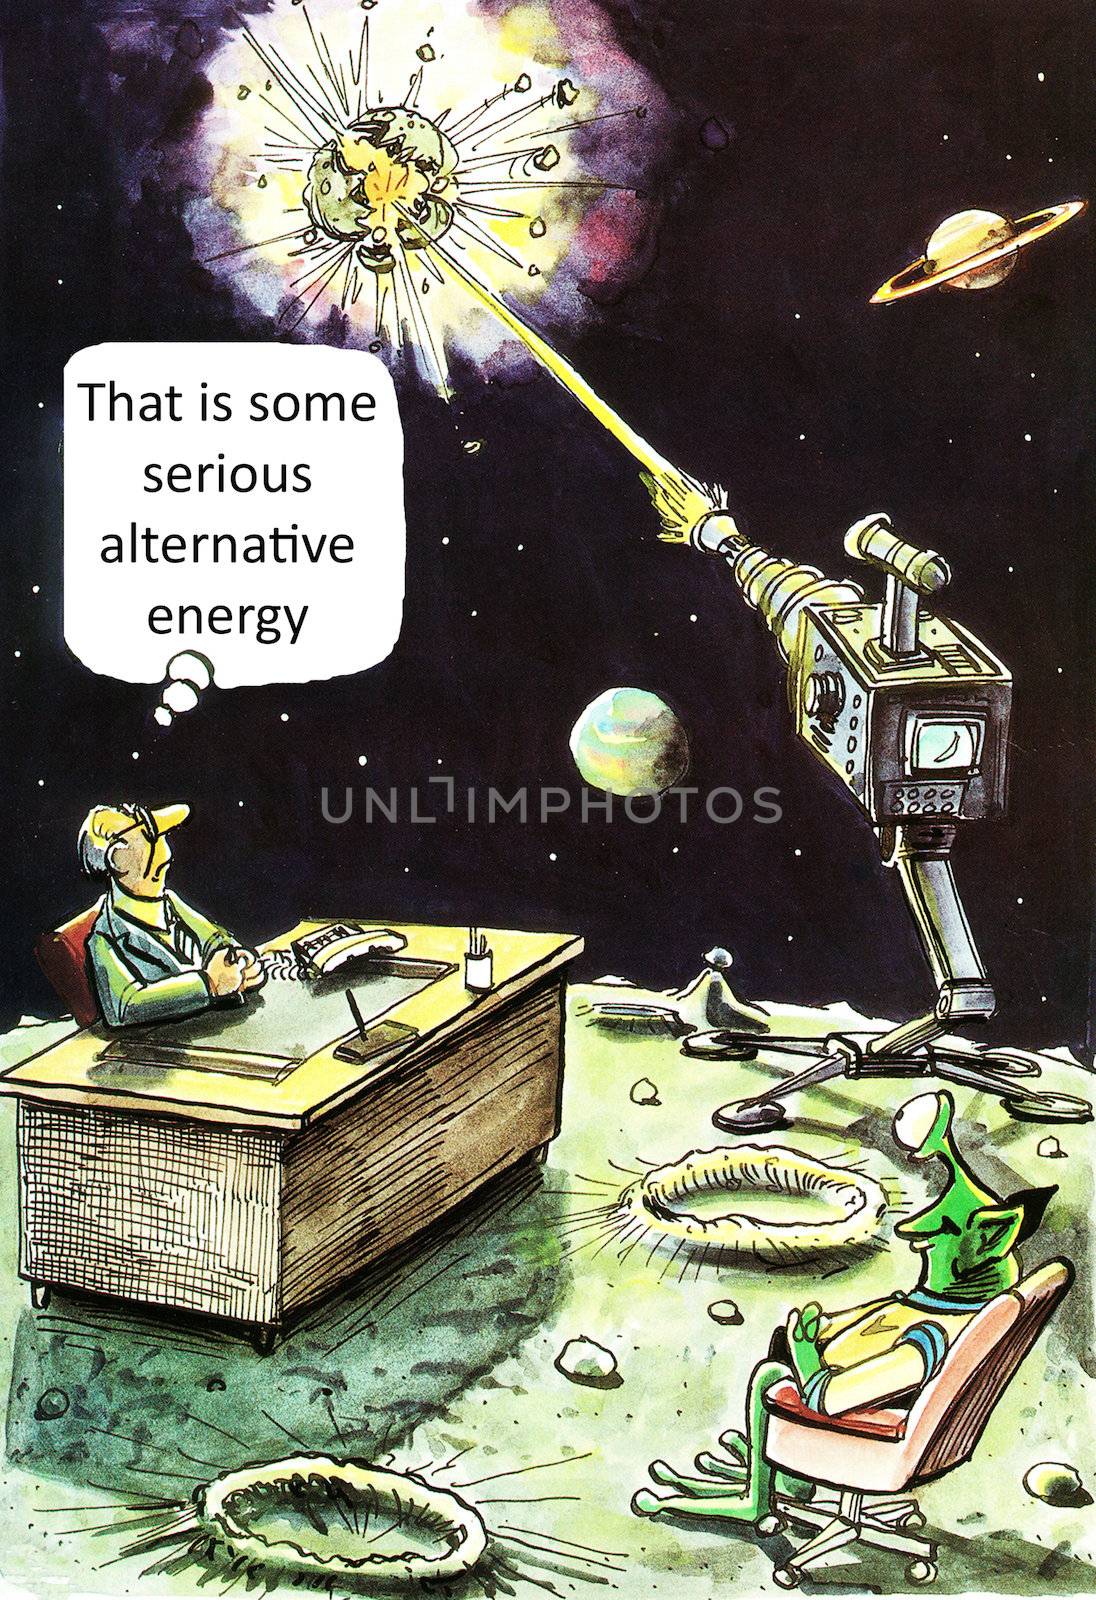 'That's some serious alternative energy.'